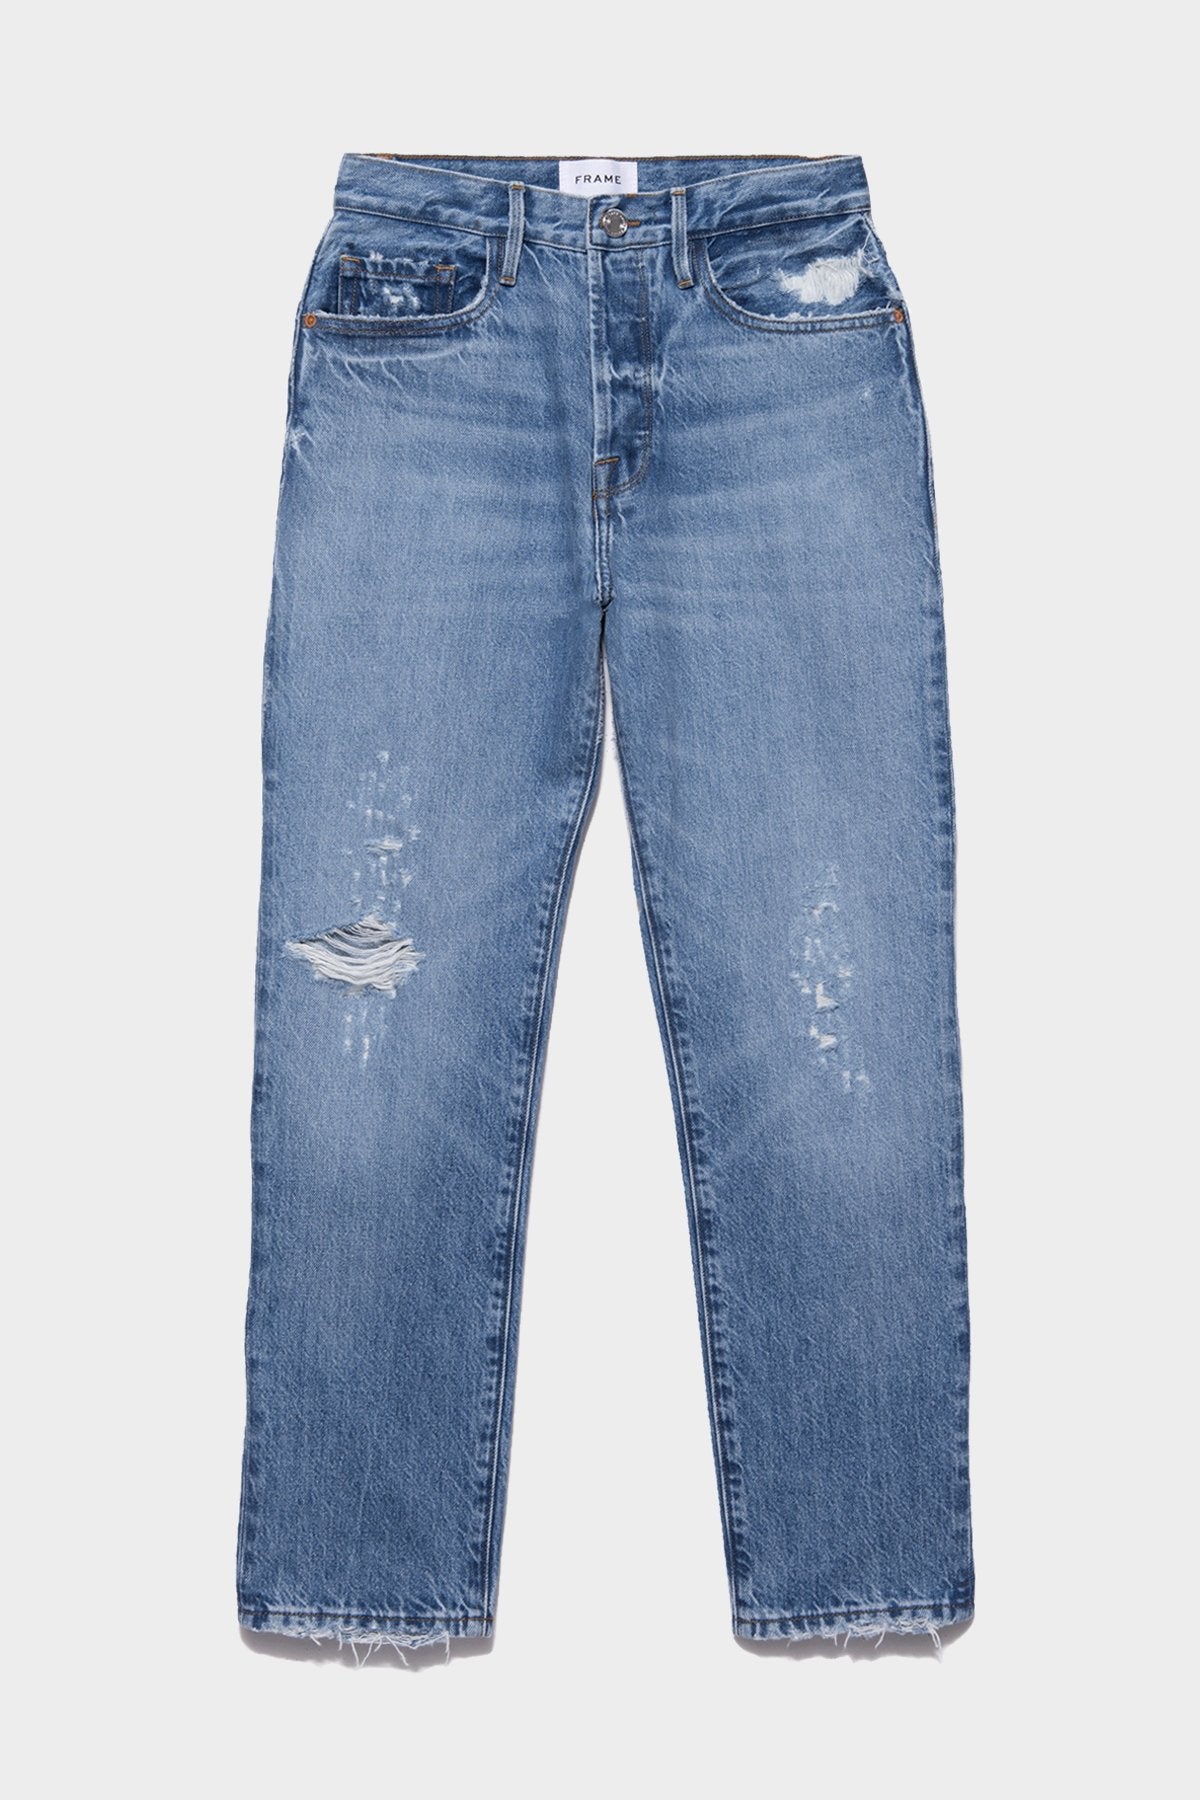 Le Pixie Slouch Biodegradable Jean in Bluejay Rips - shop-olivia.com